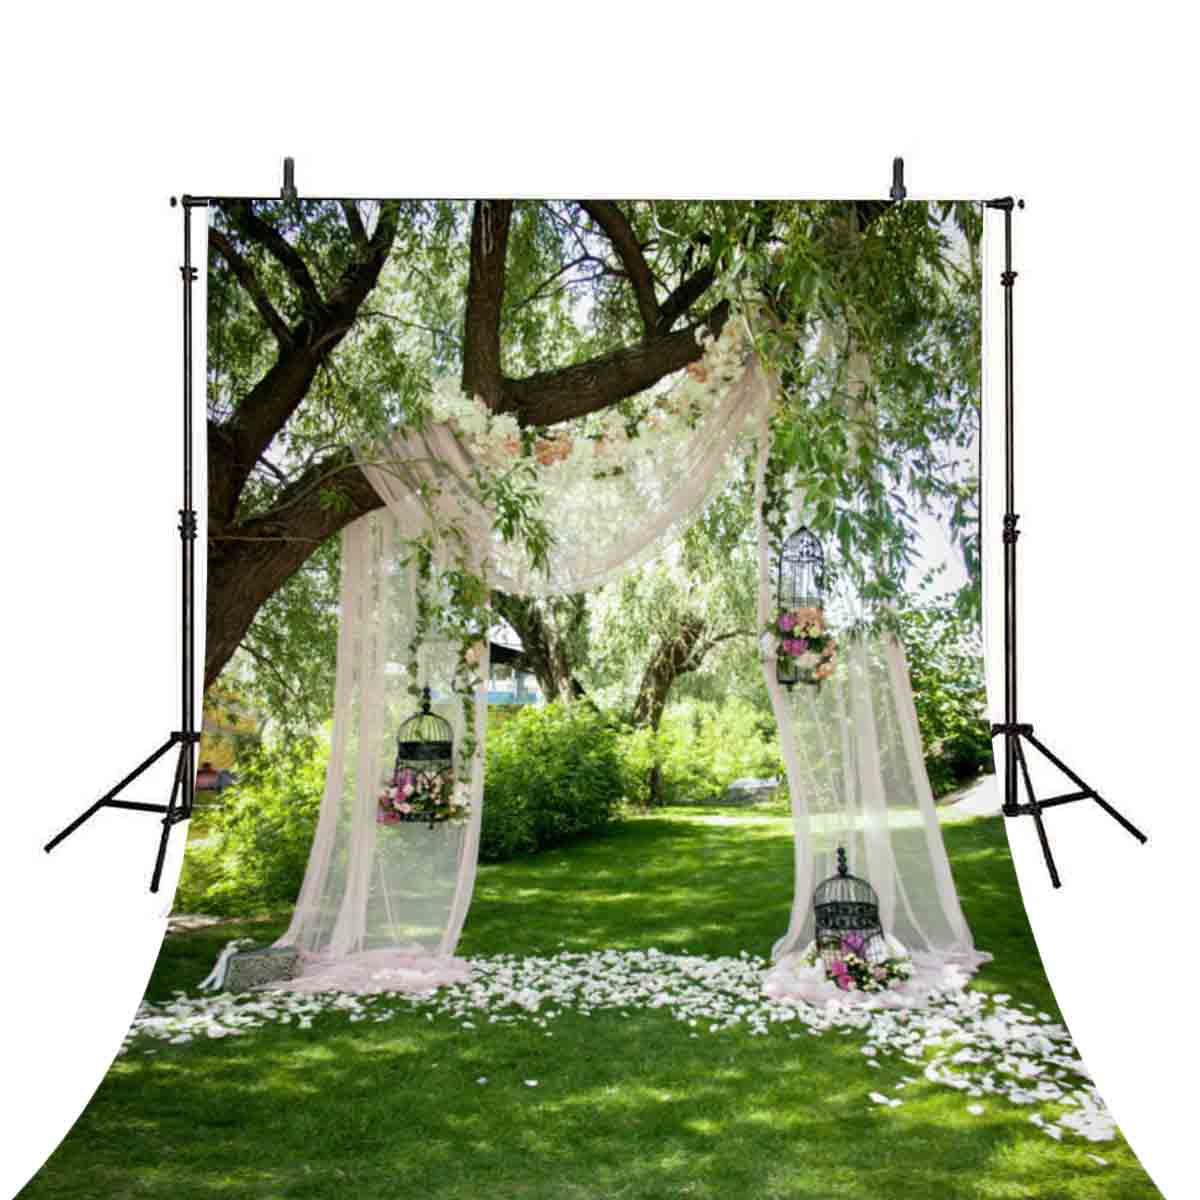 GoEoo 9x6ft Arch Flowers Wedding Shower Photography Backdrops Drapes Park Venue Engagement Bridal Shower Anniversay Background Party Events Valentines Day Decoration Photo Studio Props 